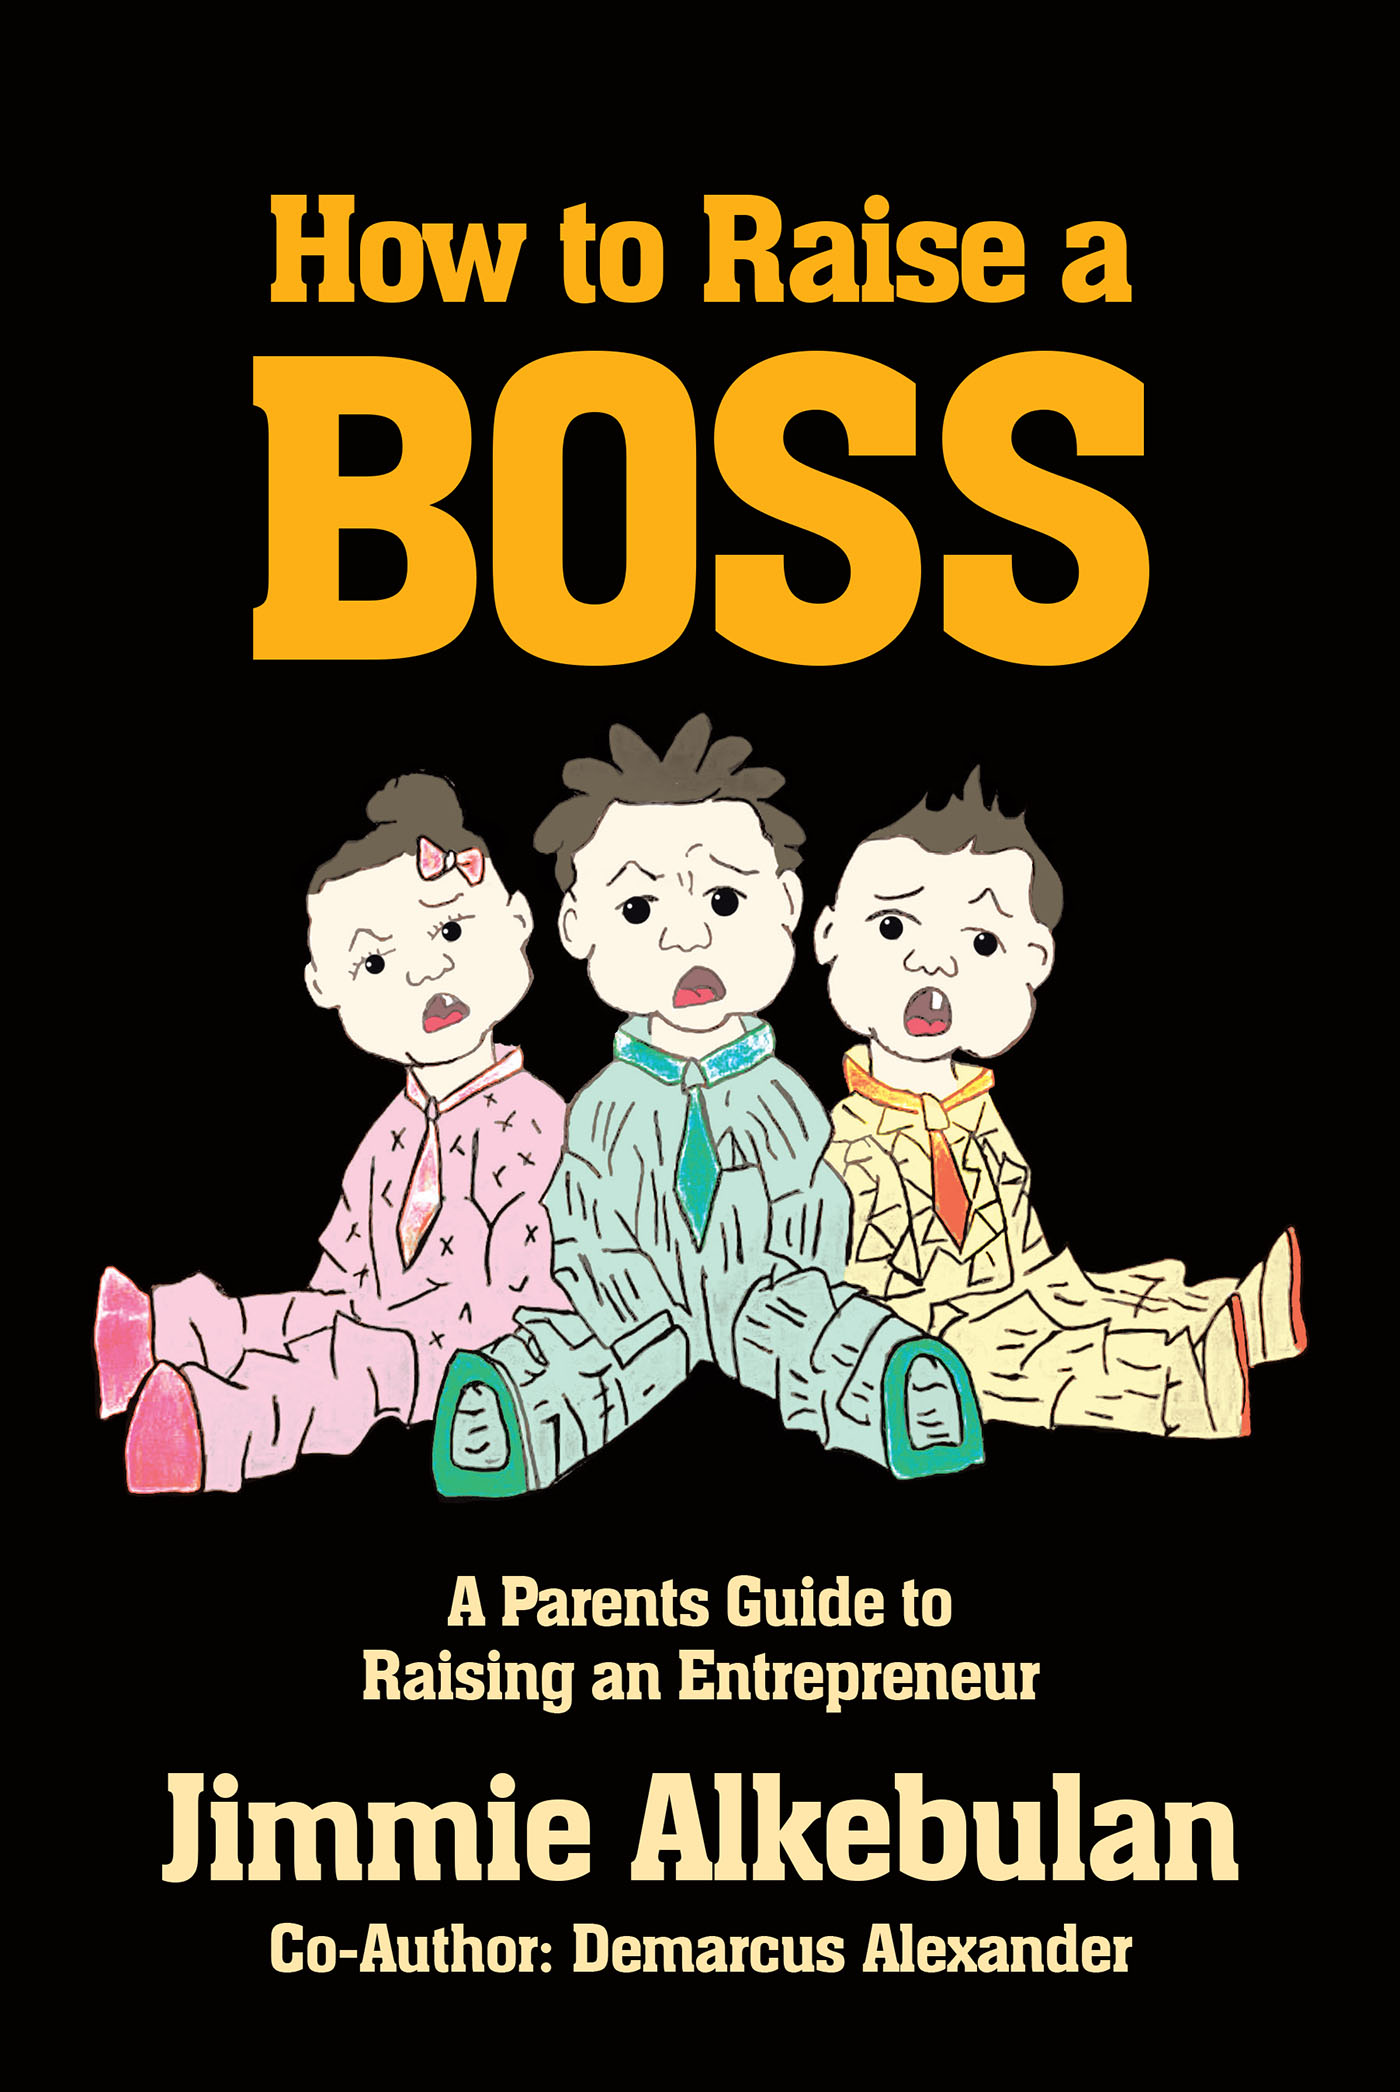 Authors Jimmie Alkebulan and Demarcus Alexander’s New Book, "How to Raise a Boss: A Parent’s Guide to Raising an Entrepreneur," is a One-of-a-Kind Guide for Parents